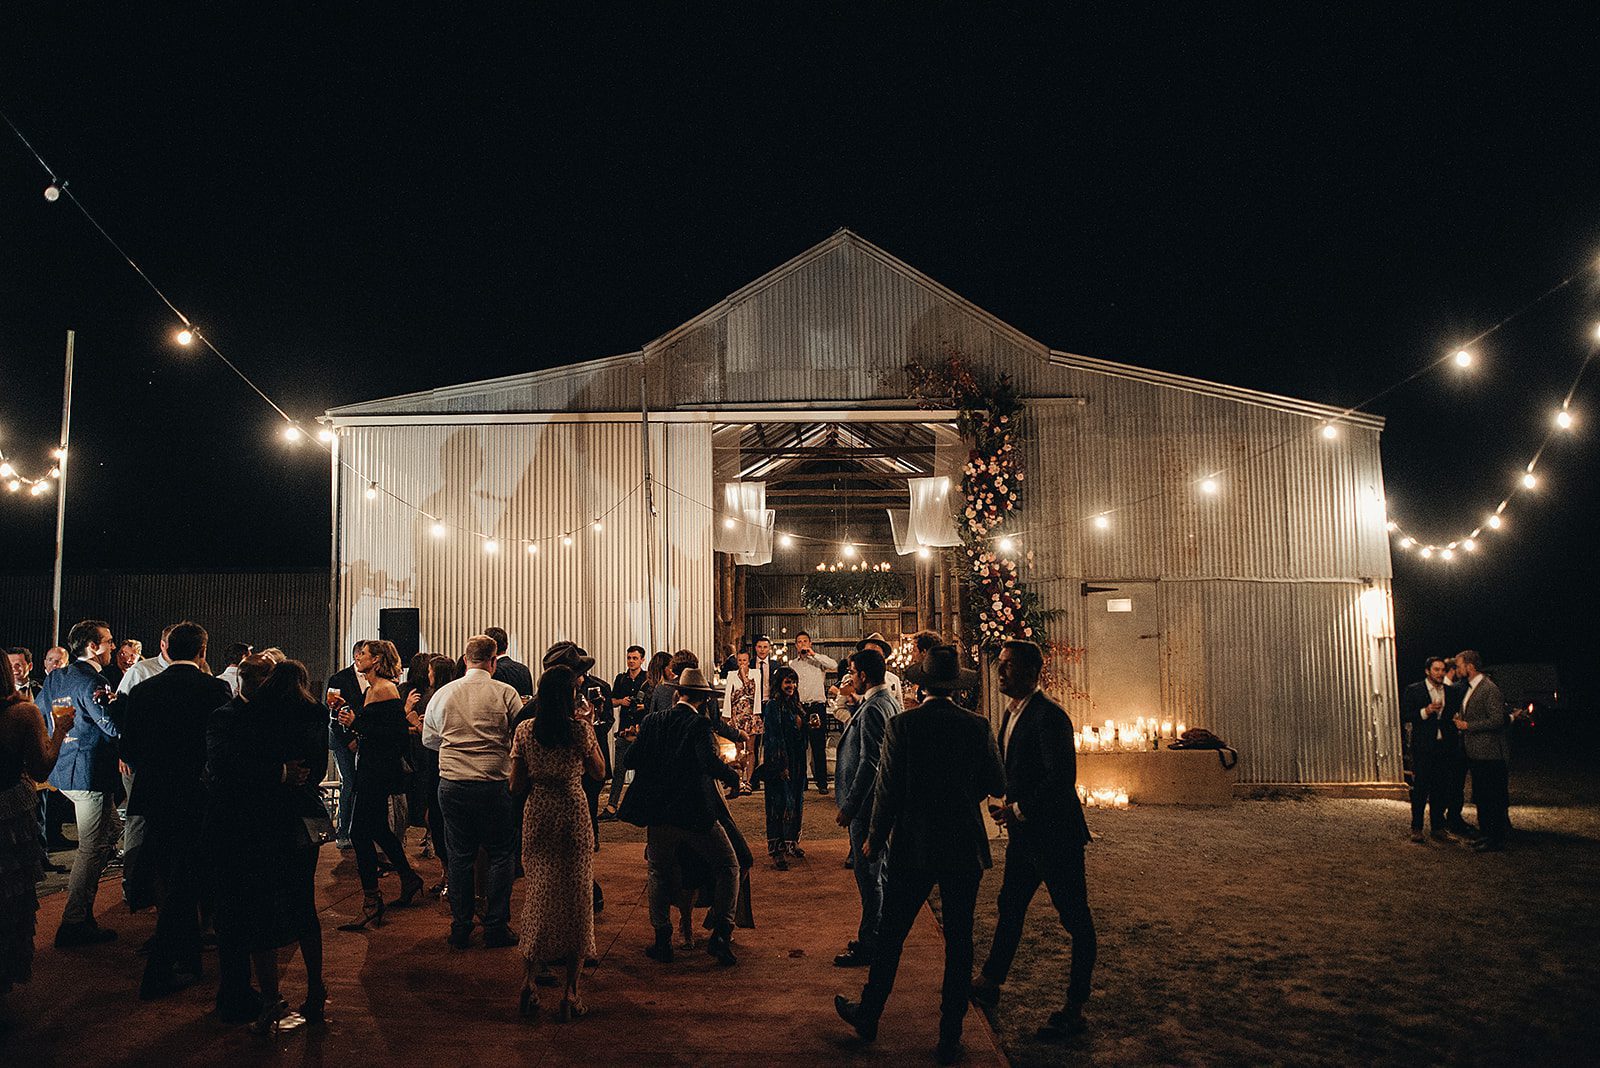 Barn Wedding Venue on a farm in country NSW. Wedding guests dance under festoon lights in the night others stand talking.